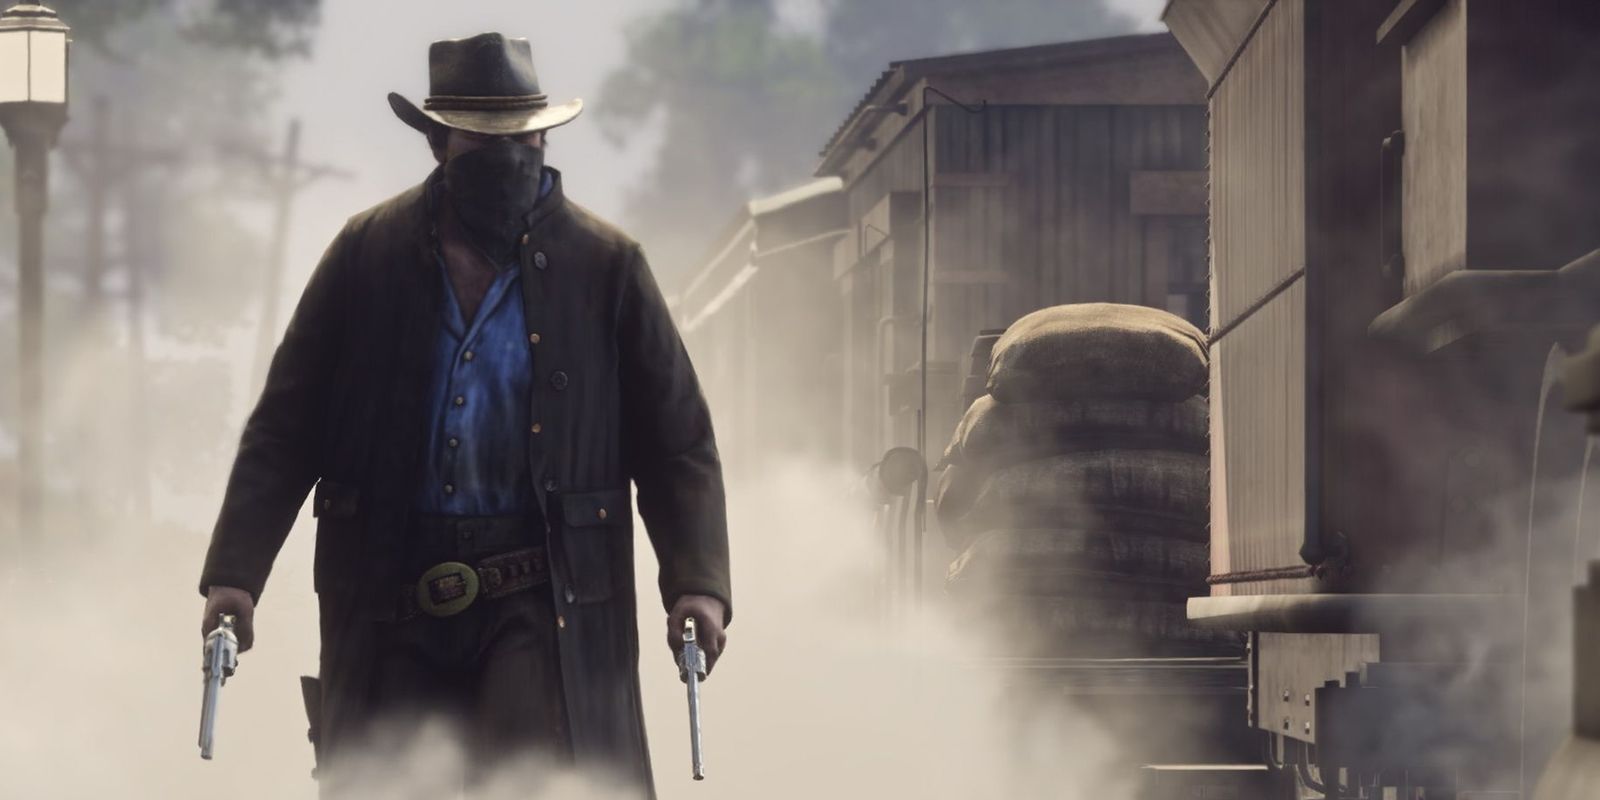 slette galop tvivl Sony May Allow Red Dead Redemption Cross-Play